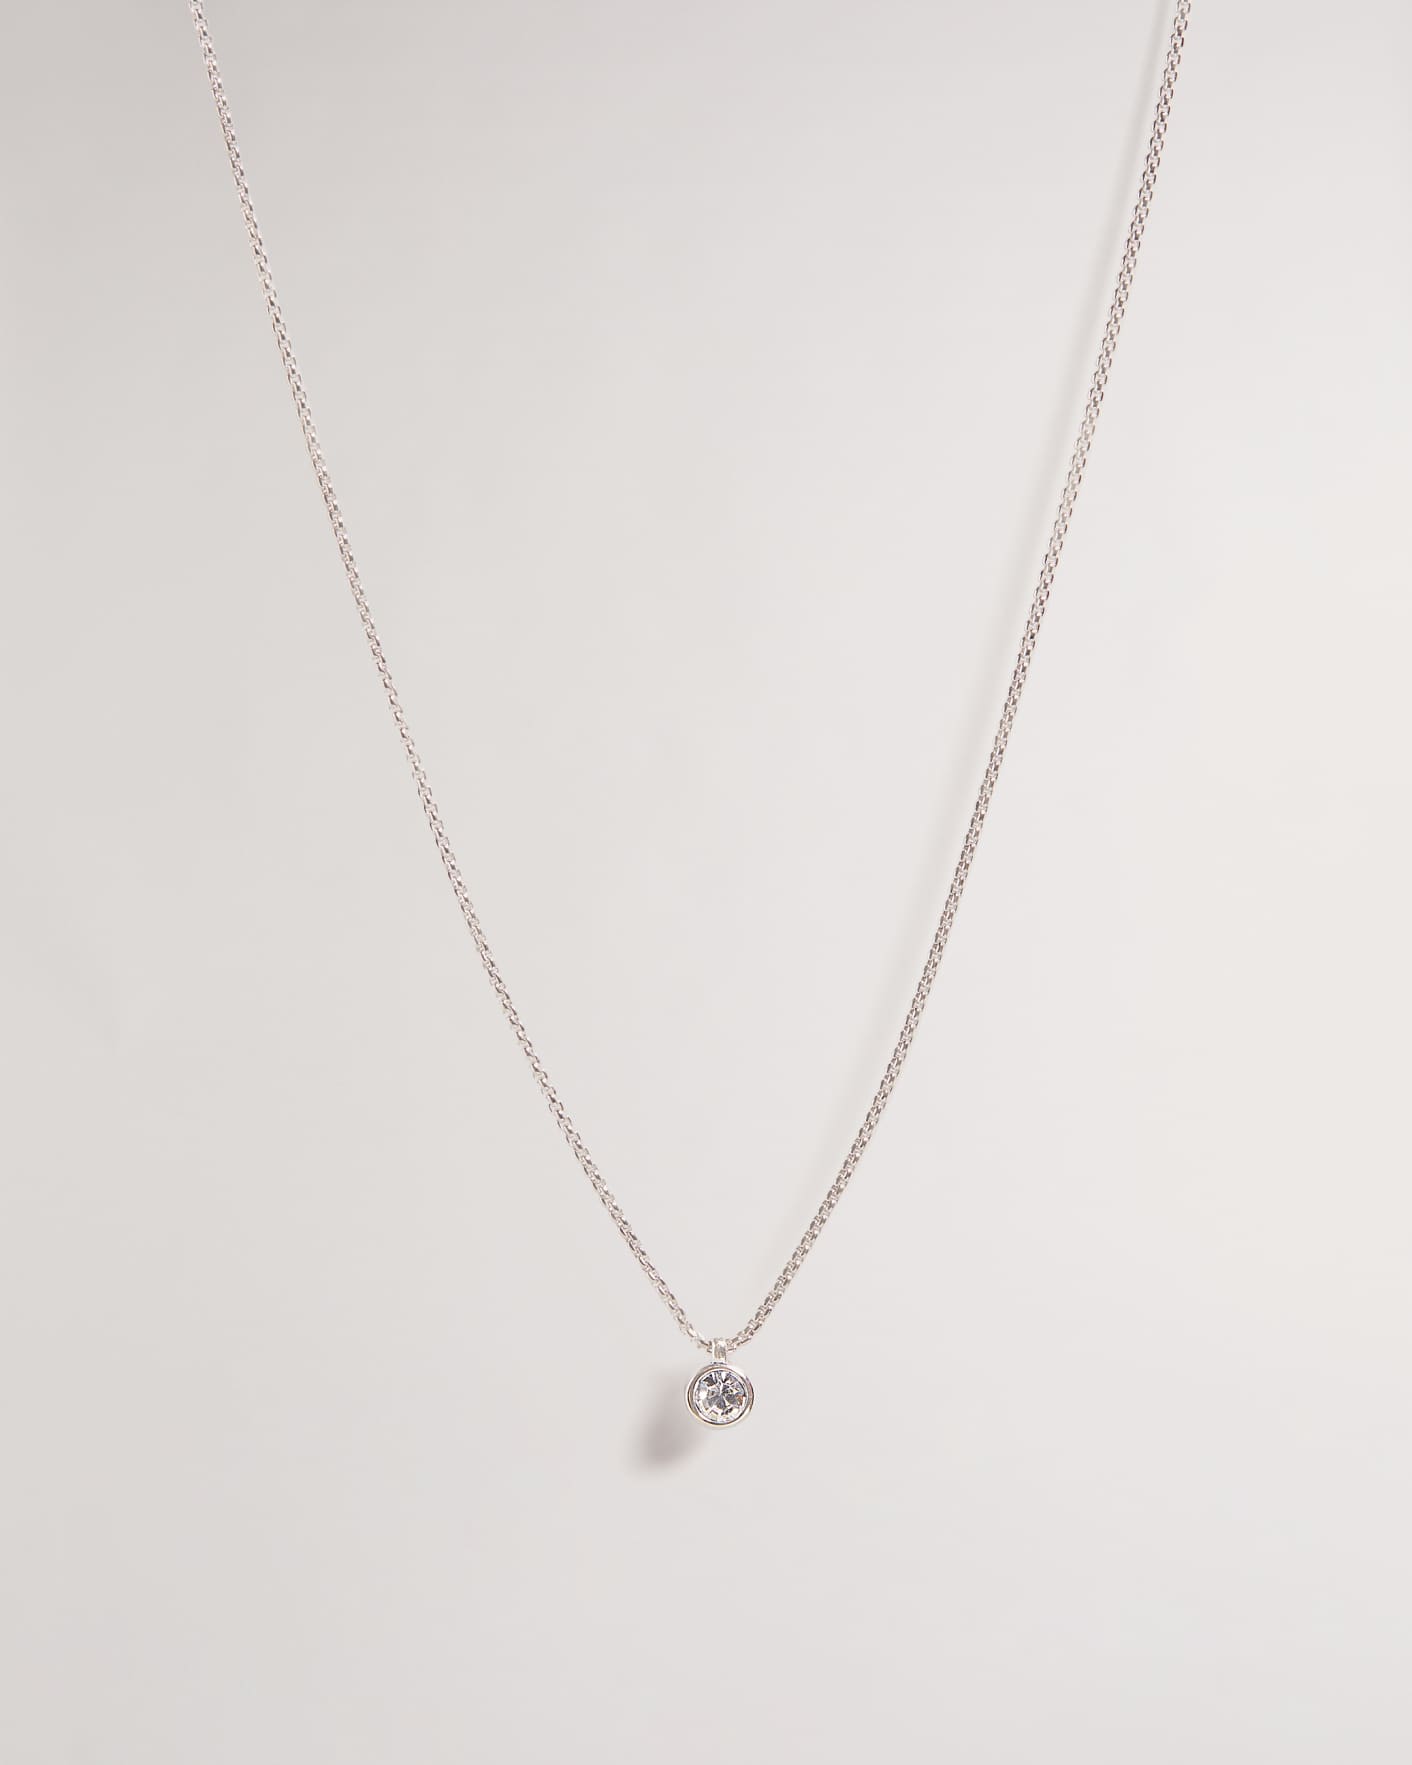 Sinnina Crystal Necklace in Silver | eightywingold - official partner of Ted Baker